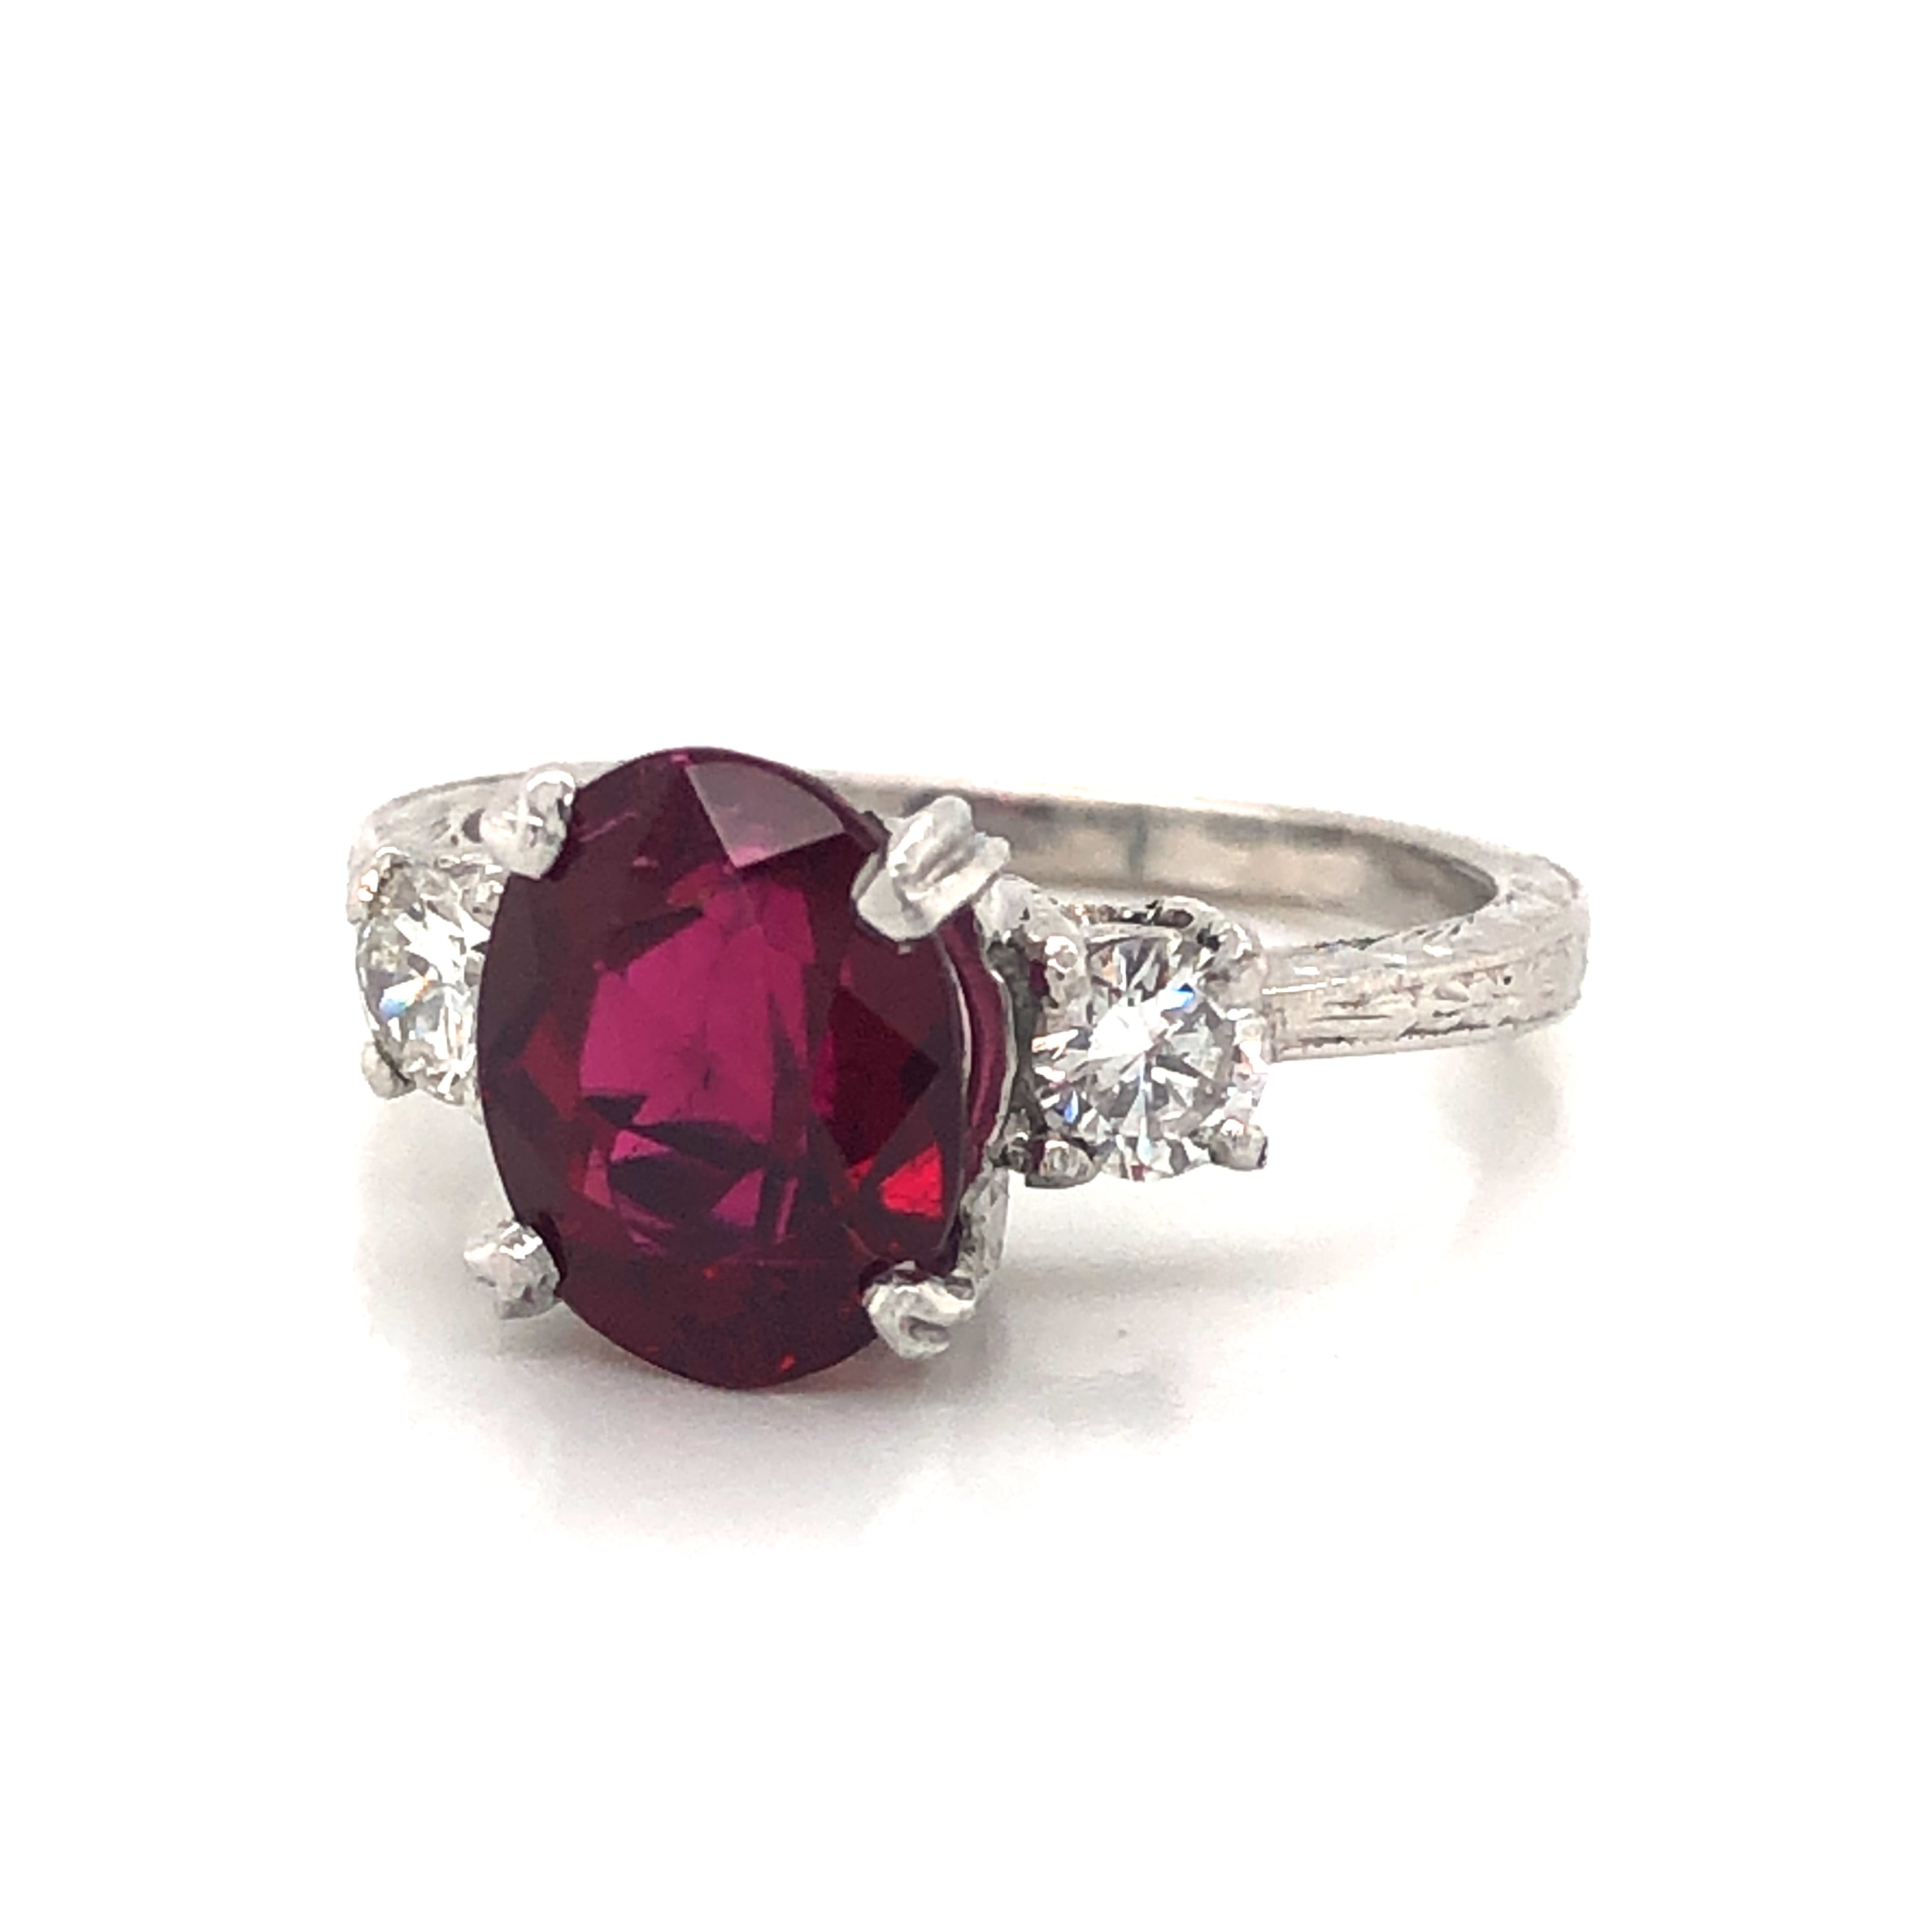 Tacori Oval Ruby Engagement Ring in Platinum on Vimeo